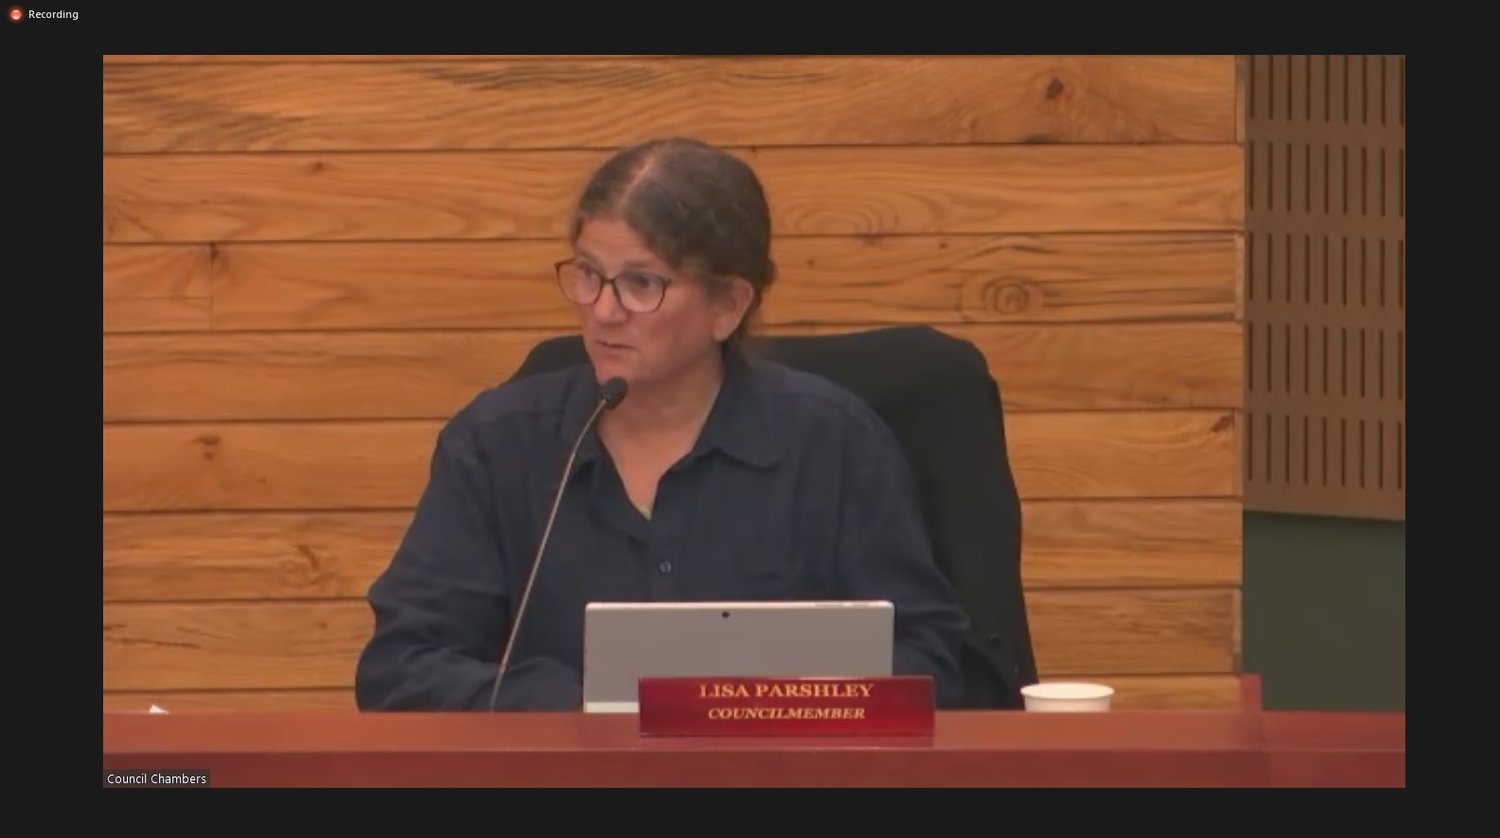 Olympia Councilmember Lisa Parshley, on Tuesday, September 20, 2022, made a referral request to city and finance committee staff and legal team to look for options to find a revenue stream to fund climate work.